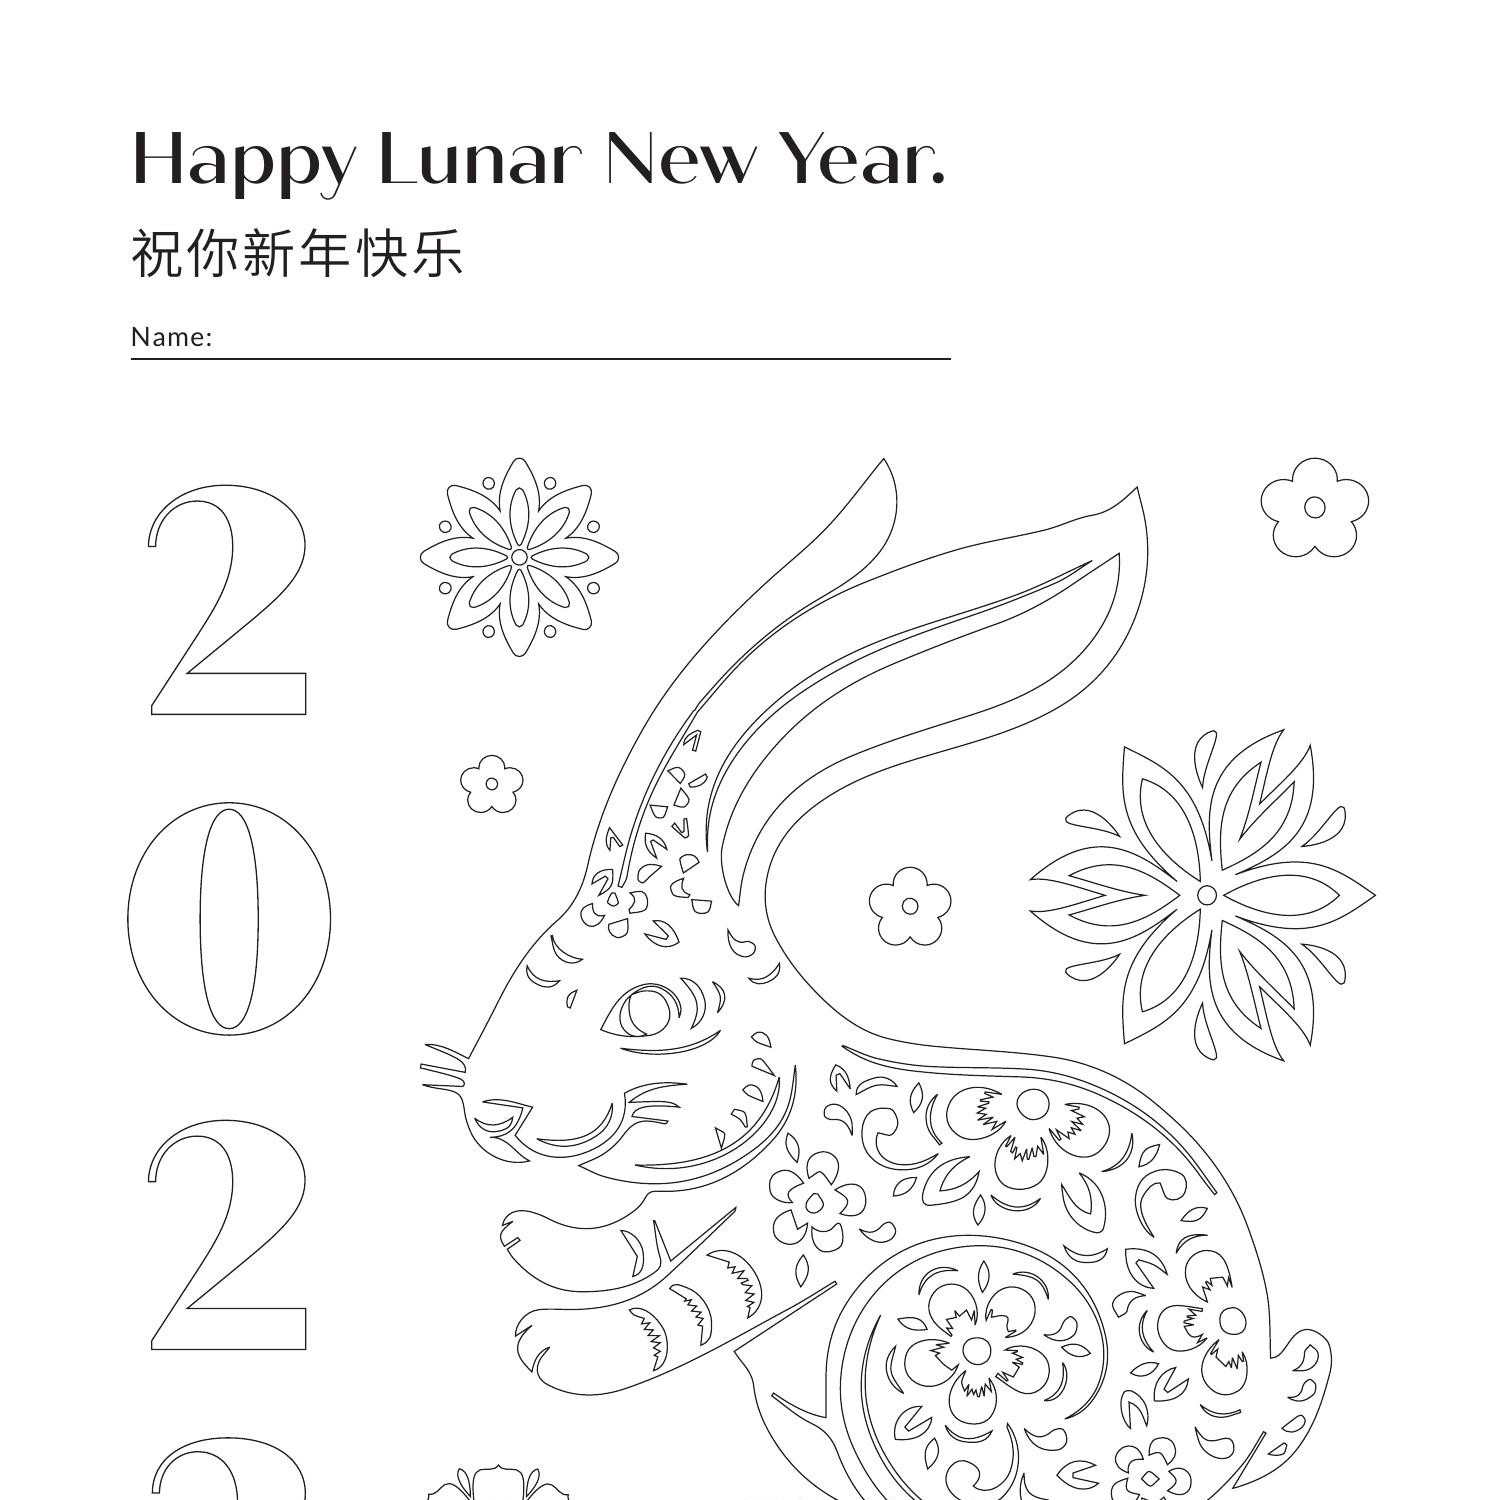 bp-lunar-new-year-colouring-page-pdf-docdroid